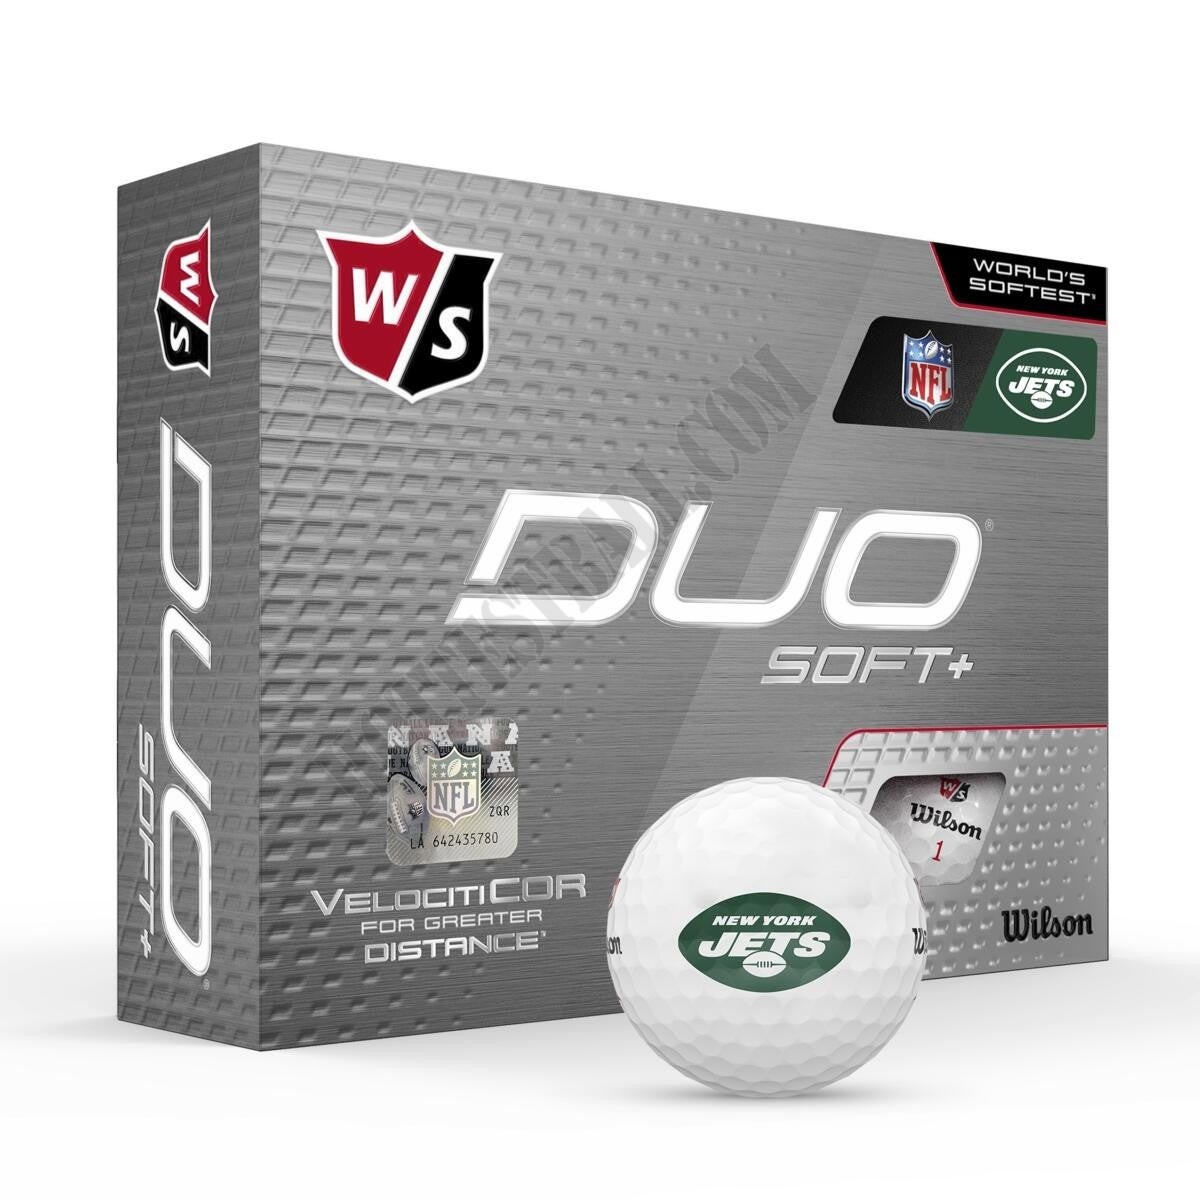 Duo Soft+ NFL Golf Balls - New York Jets ● Wilson Promotions - -0